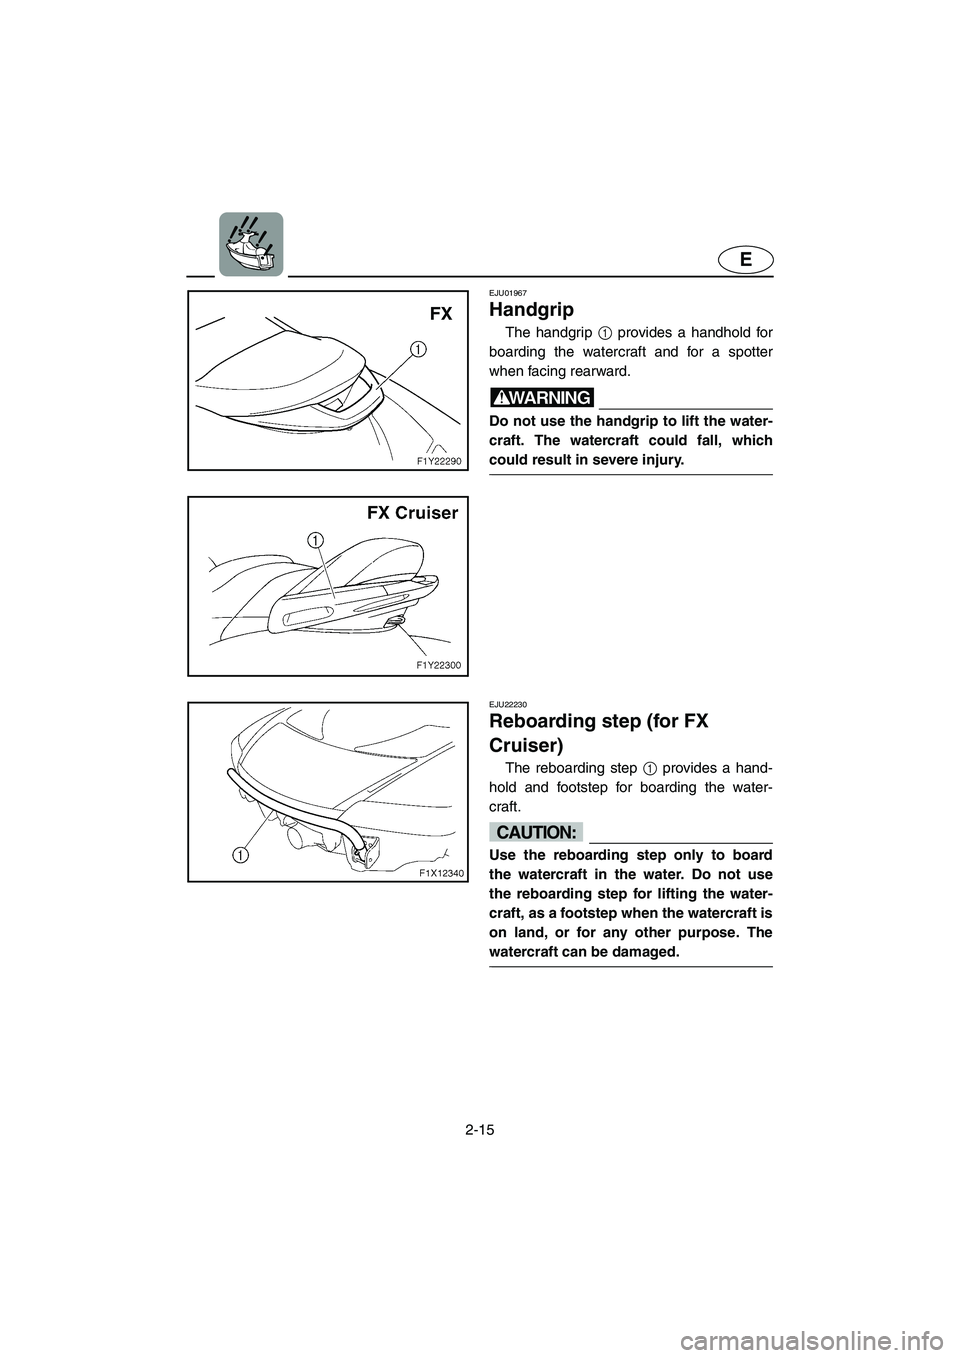 YAMAHA FX CRUISER 2006 Service Manual 2-15
E
EJU01967 
Handgrip 
The handgrip 1 provides a handhold for
boarding the watercraft and for a spotter
when facing rearward.
WARNING@ Do not use the handgrip to lift the water-
craft. The watercr